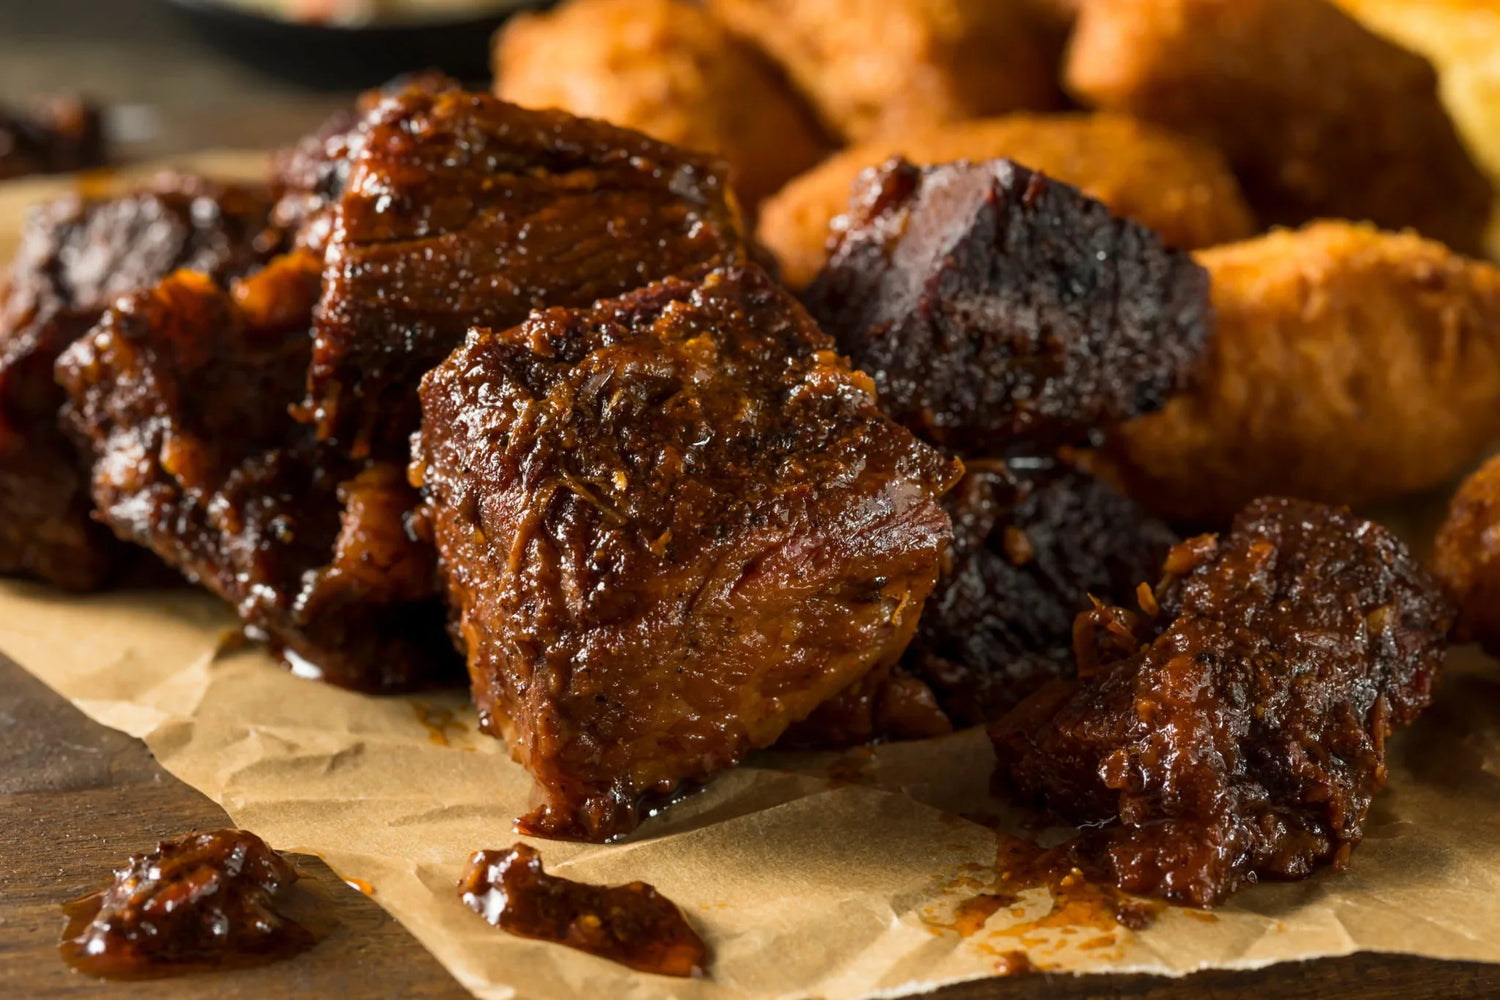 How to Make Burnt Ends Delicious